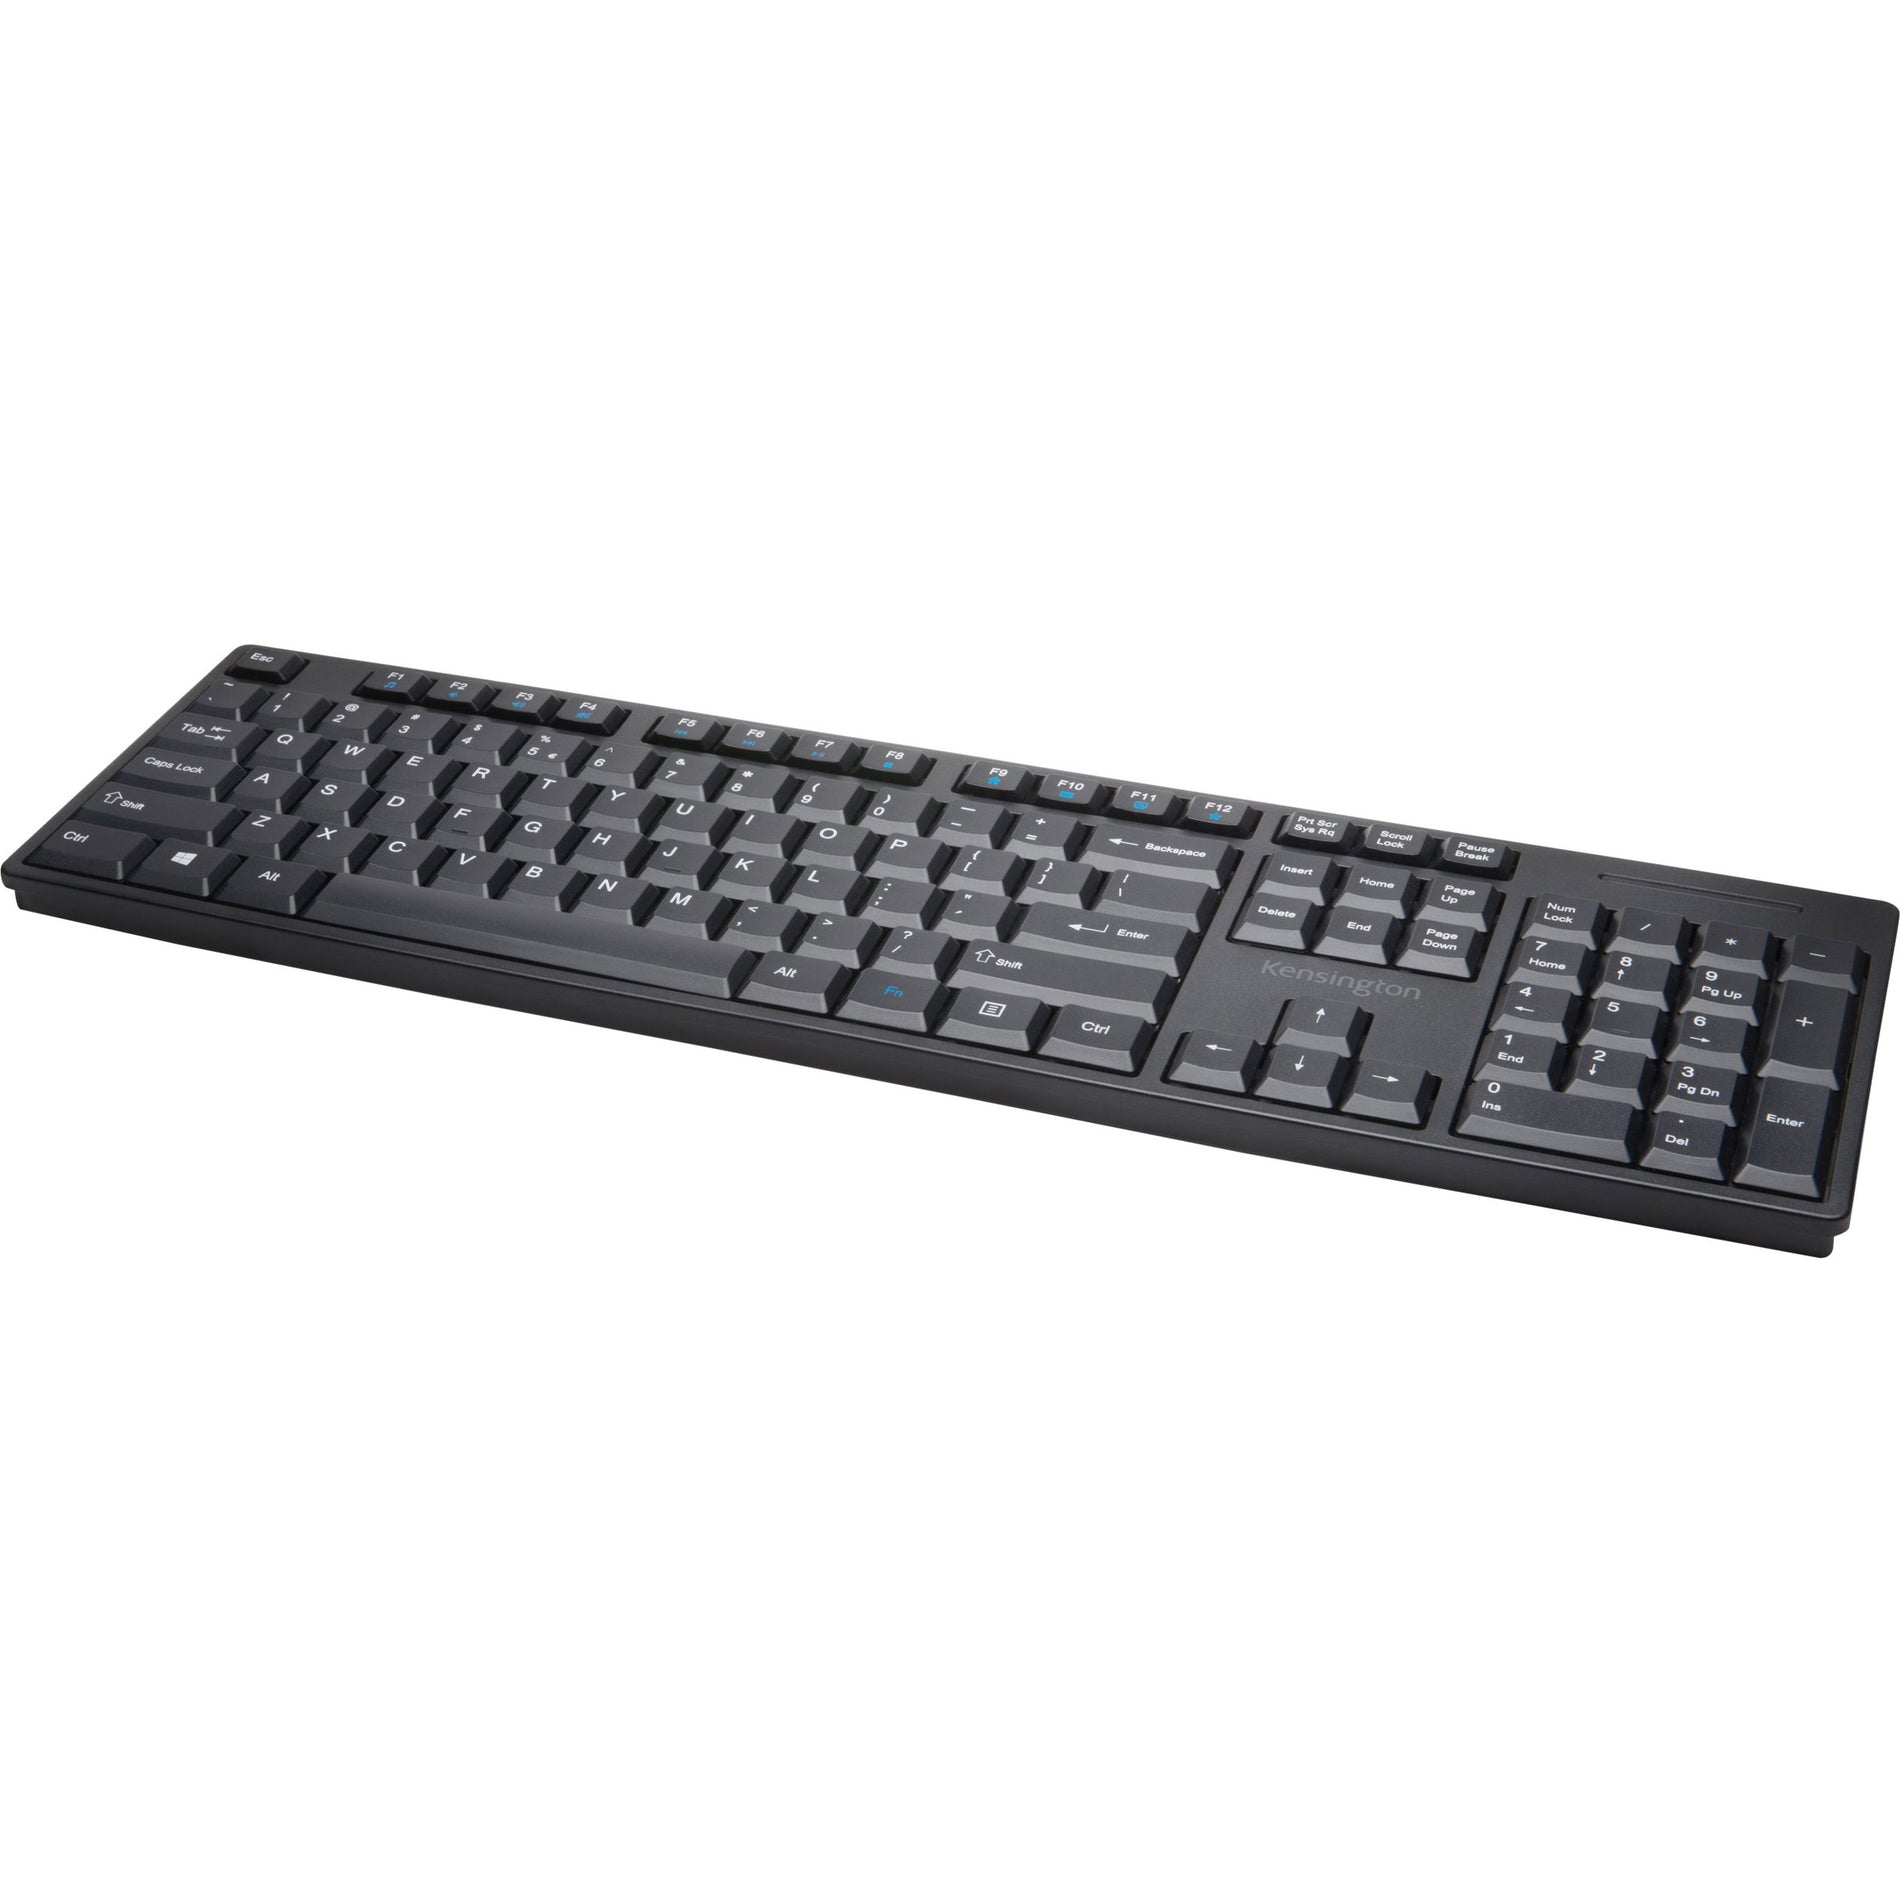 Kensington K75229US Pro Fit Low-Profile Wireless Keyboard, Compact and Reliable Typing Experience